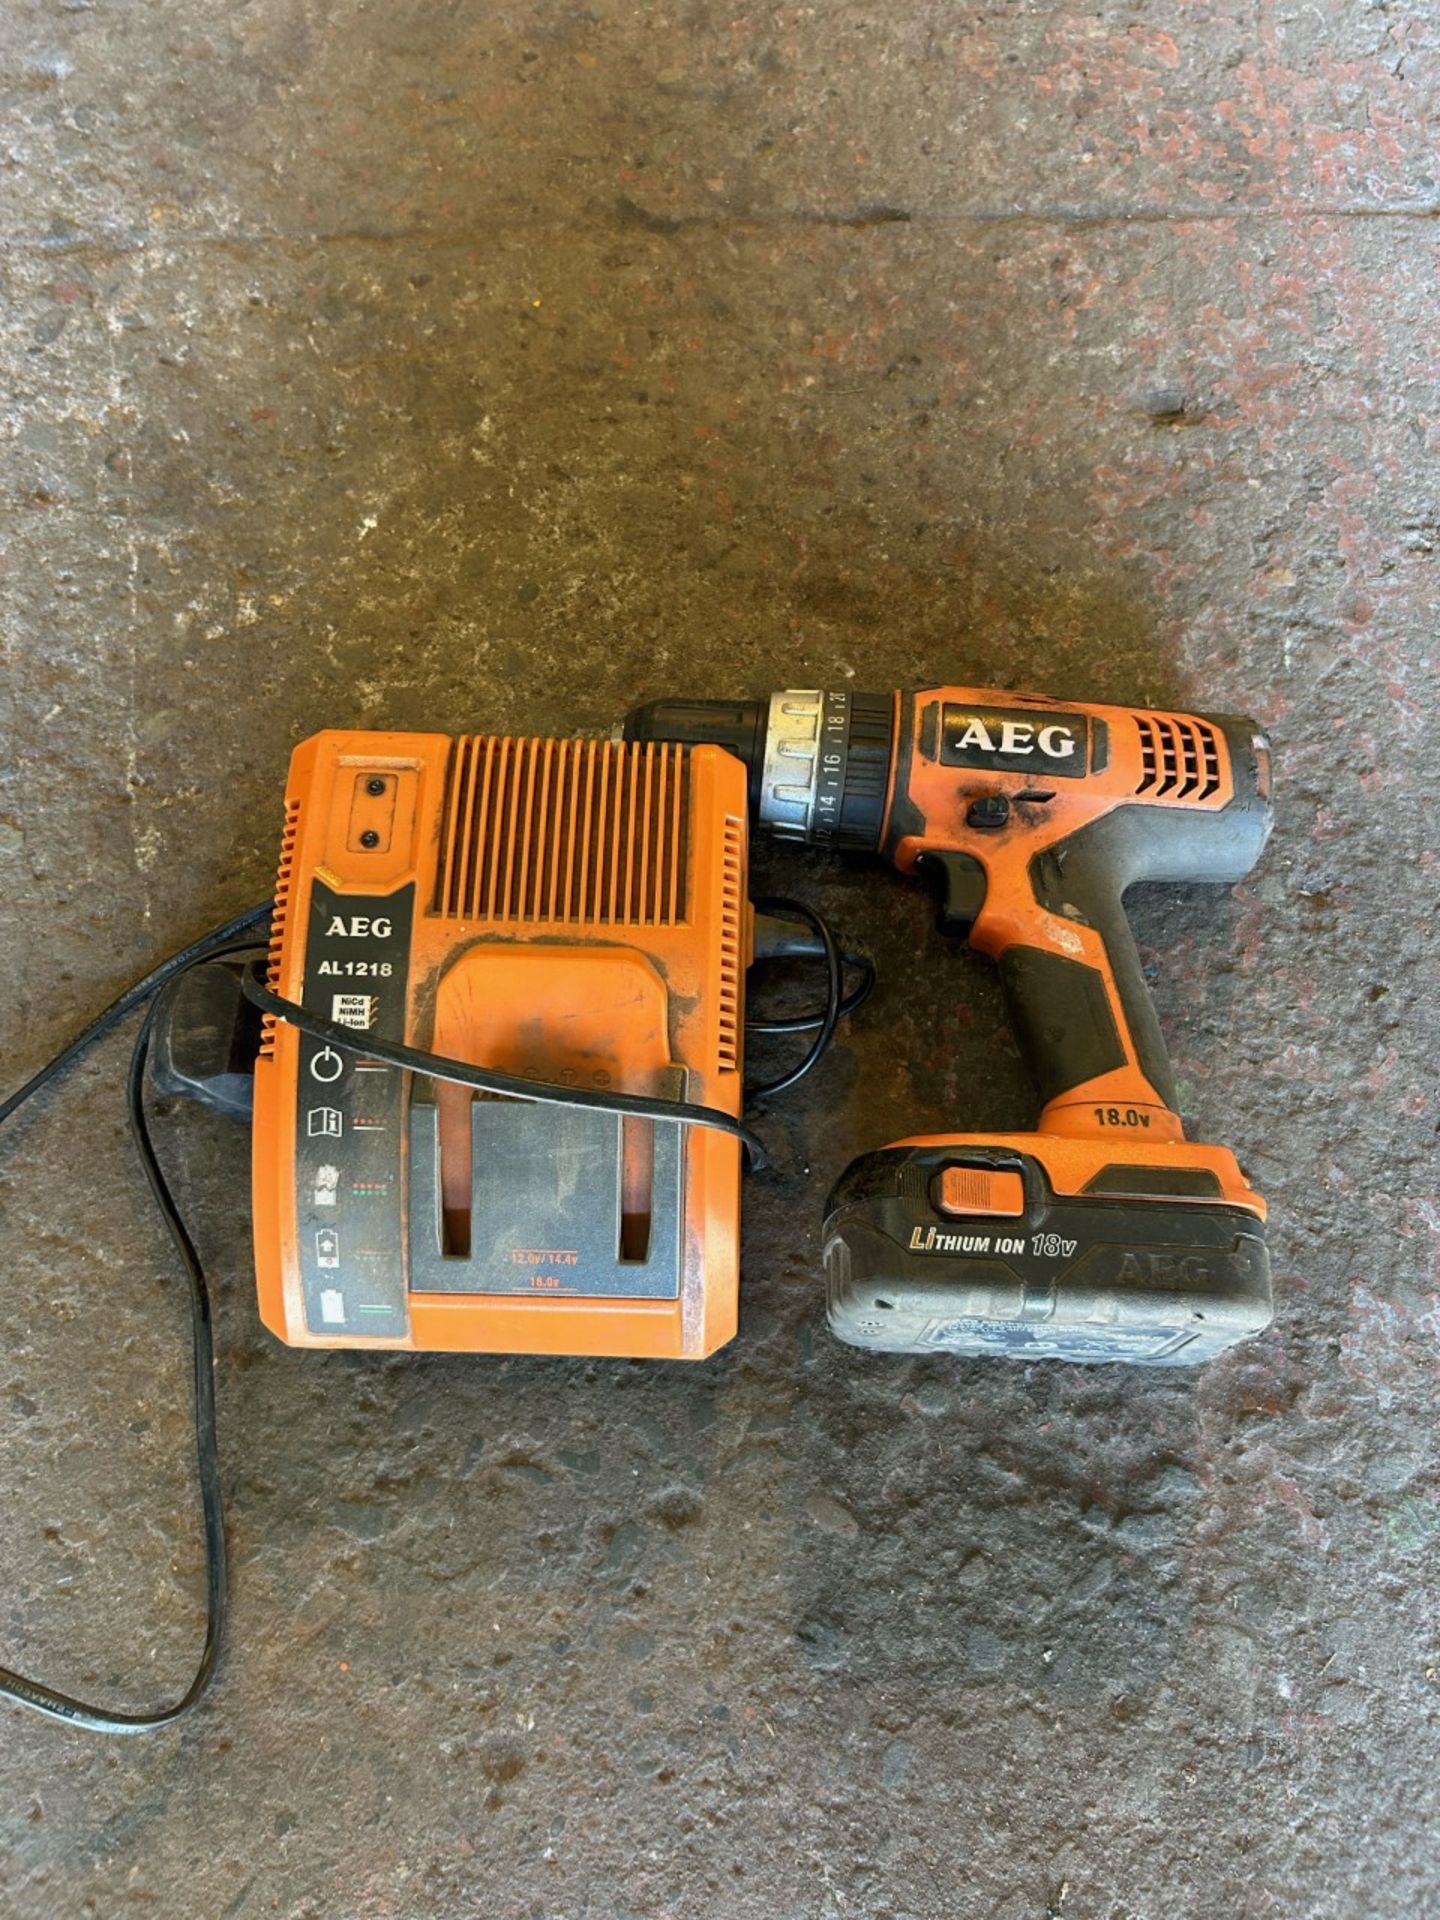 18v AEG drill with battery and charger. Battery is weak